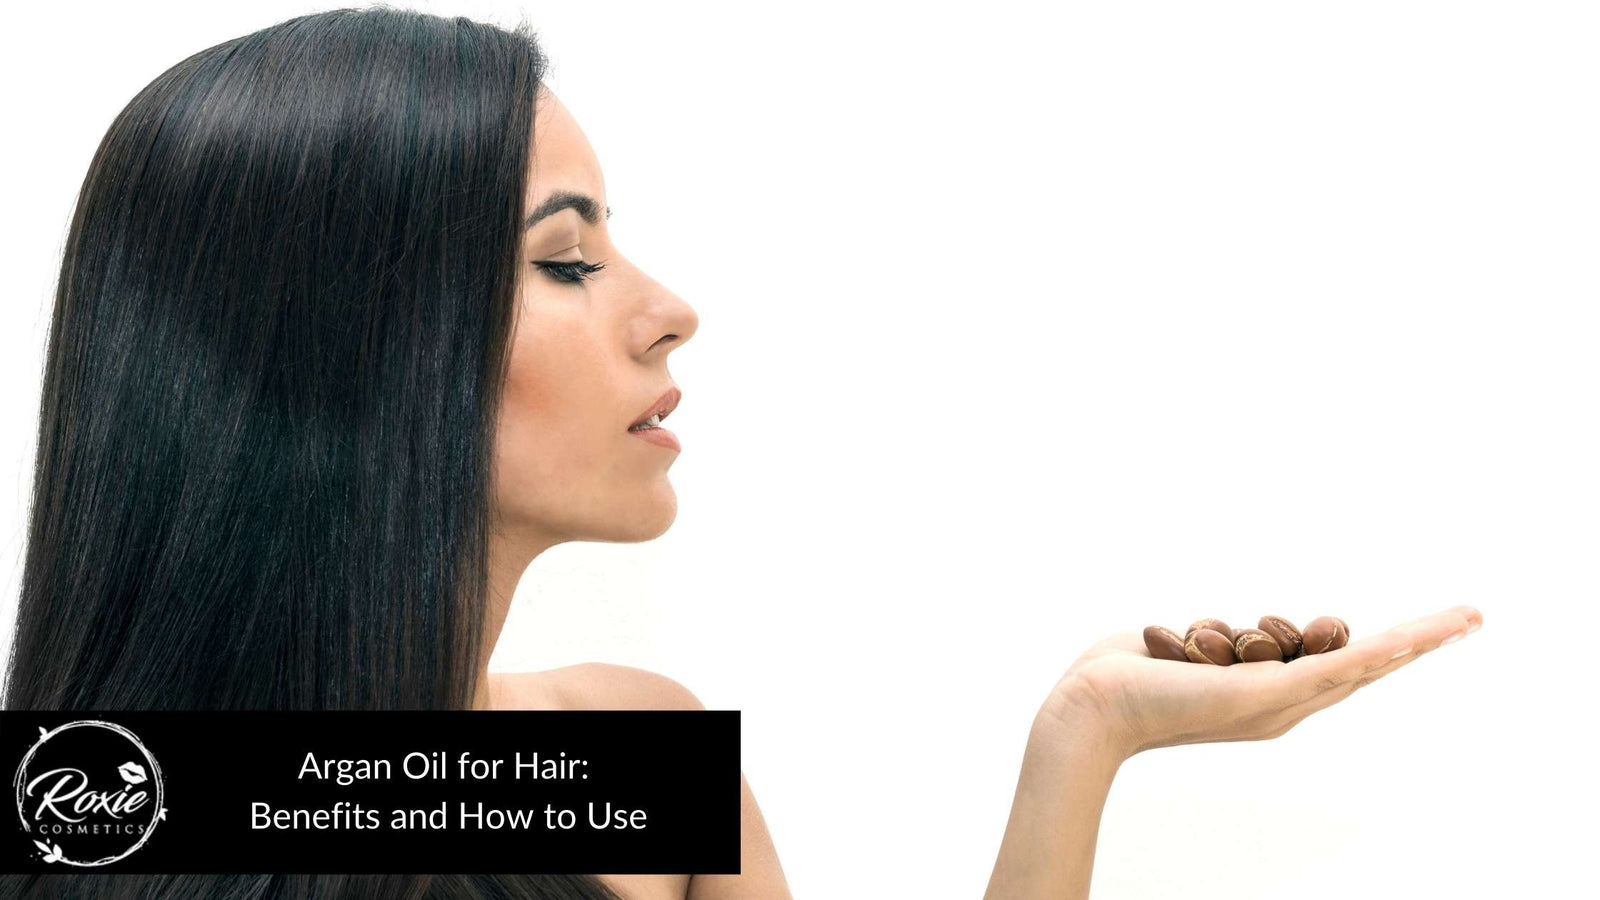 Argan Oil for Hair: Benefits and How to Use